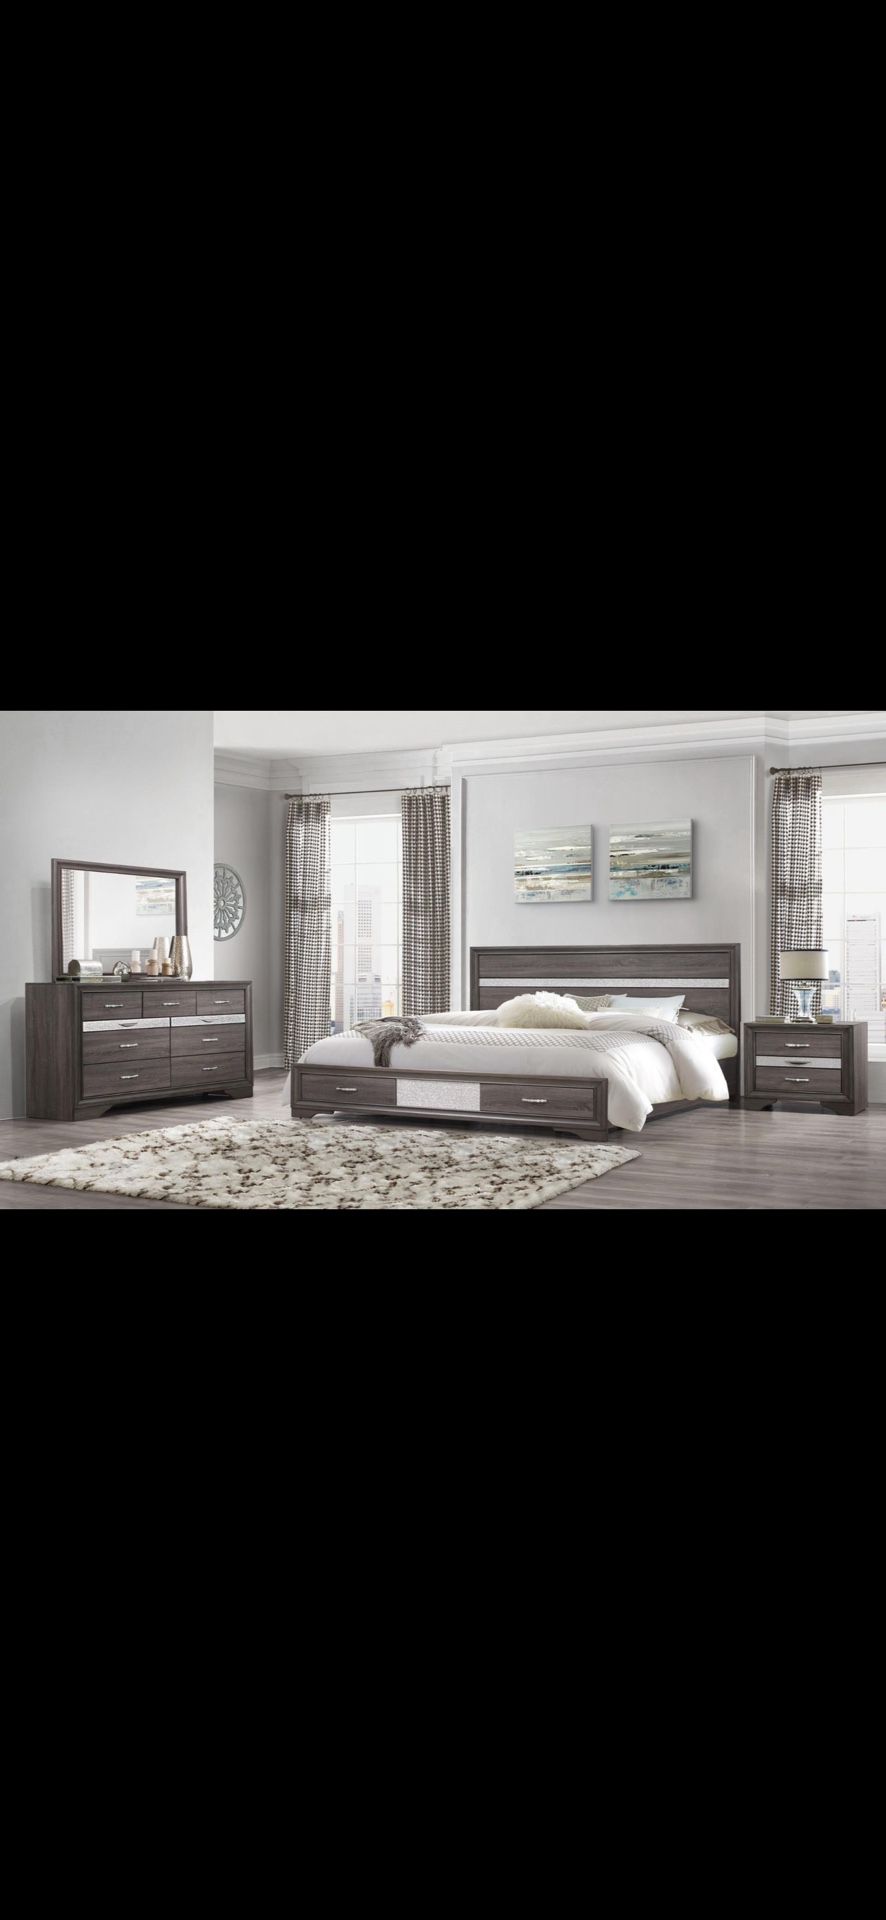 Brand New Complete Bedroom Set With Storage For $999